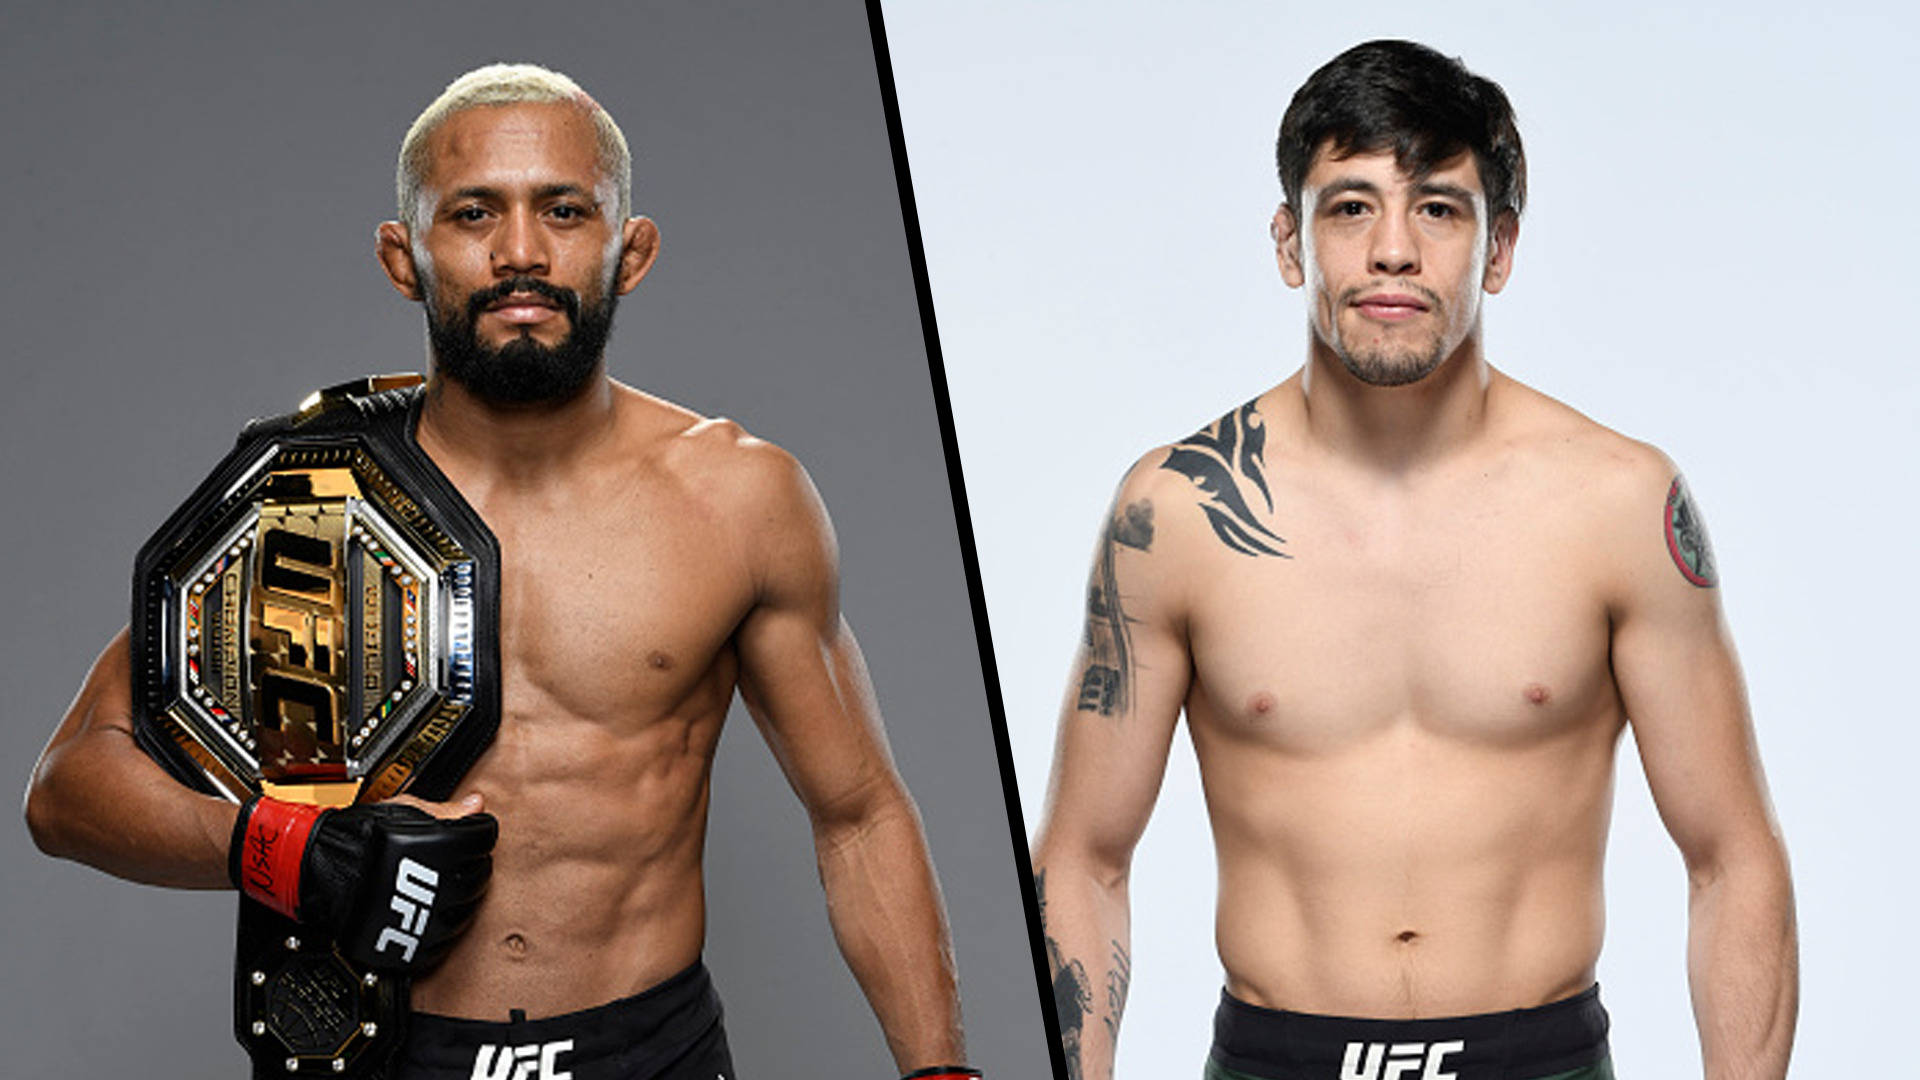 UFC Fighters Deiveson Figueiredo and Brandon Moreno in Action Wallpaper